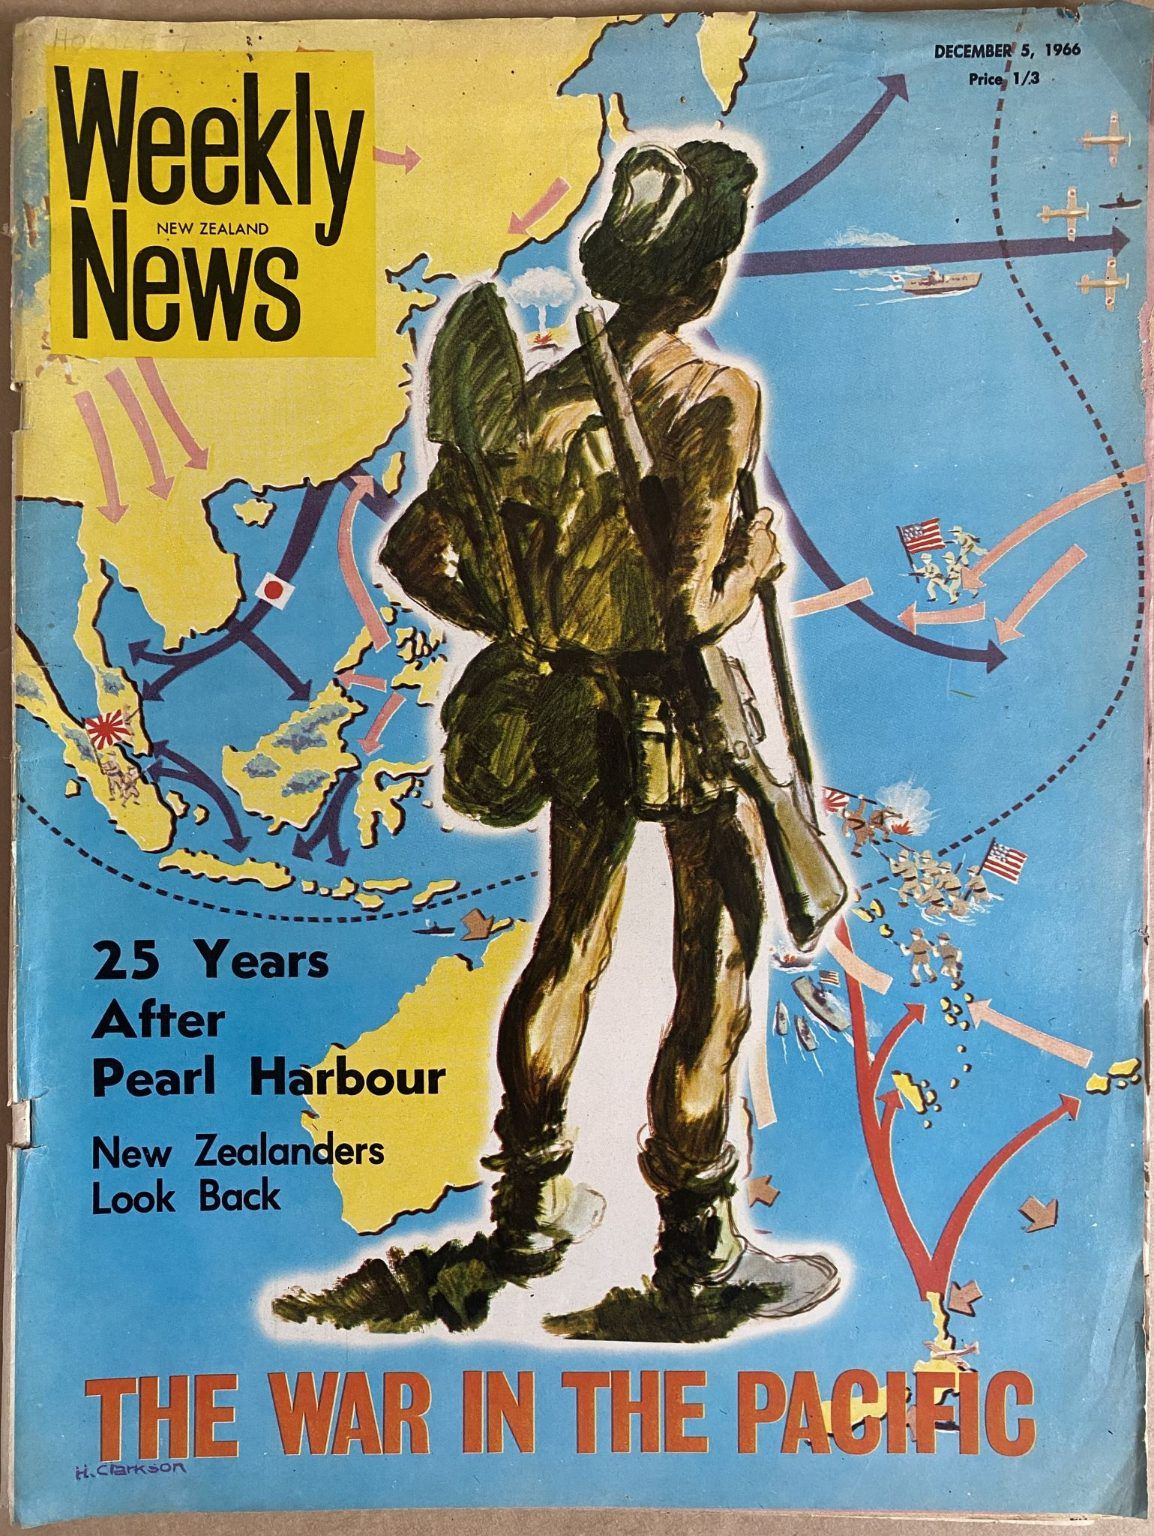 OLD NEWSPAPER: New Zealand Weekly News, No. 5376, 5 December 1966